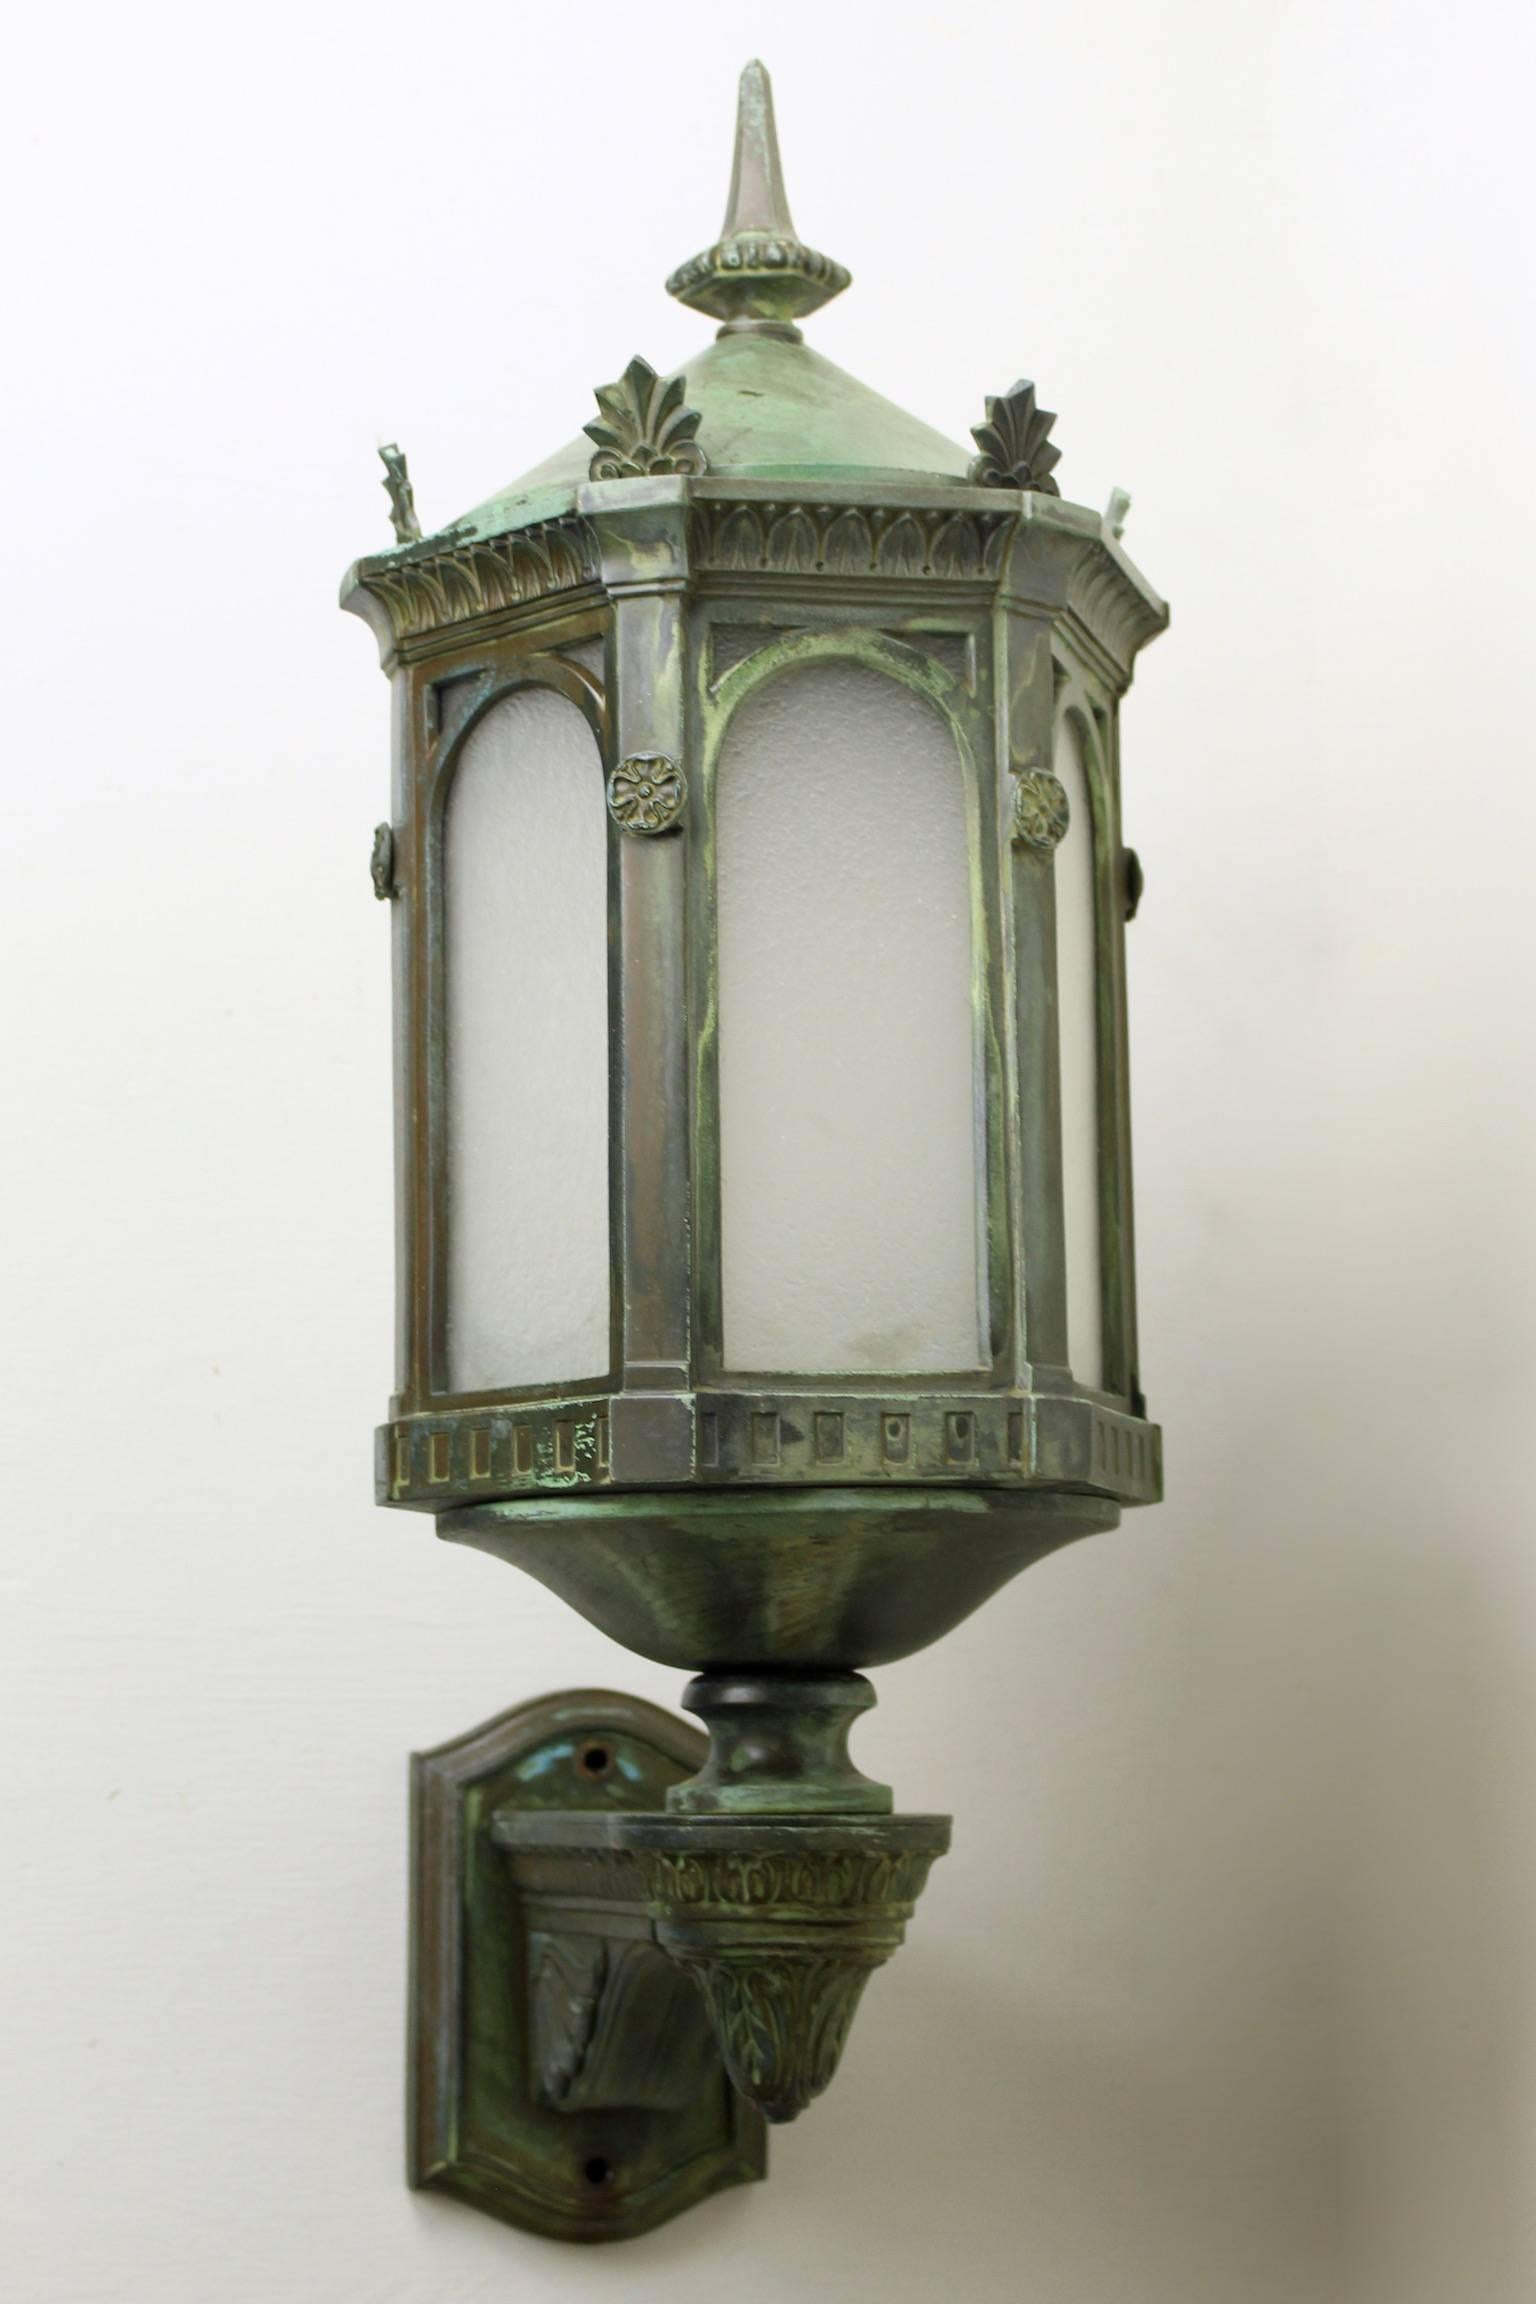 This is an absolutely superb pair of bronze neoclassical sconces with a Verdigris finish, circa 1905. They have been fully disassembled, cleaned, rewired and restored to their original splendour. Perfect for the exterior of a large home or